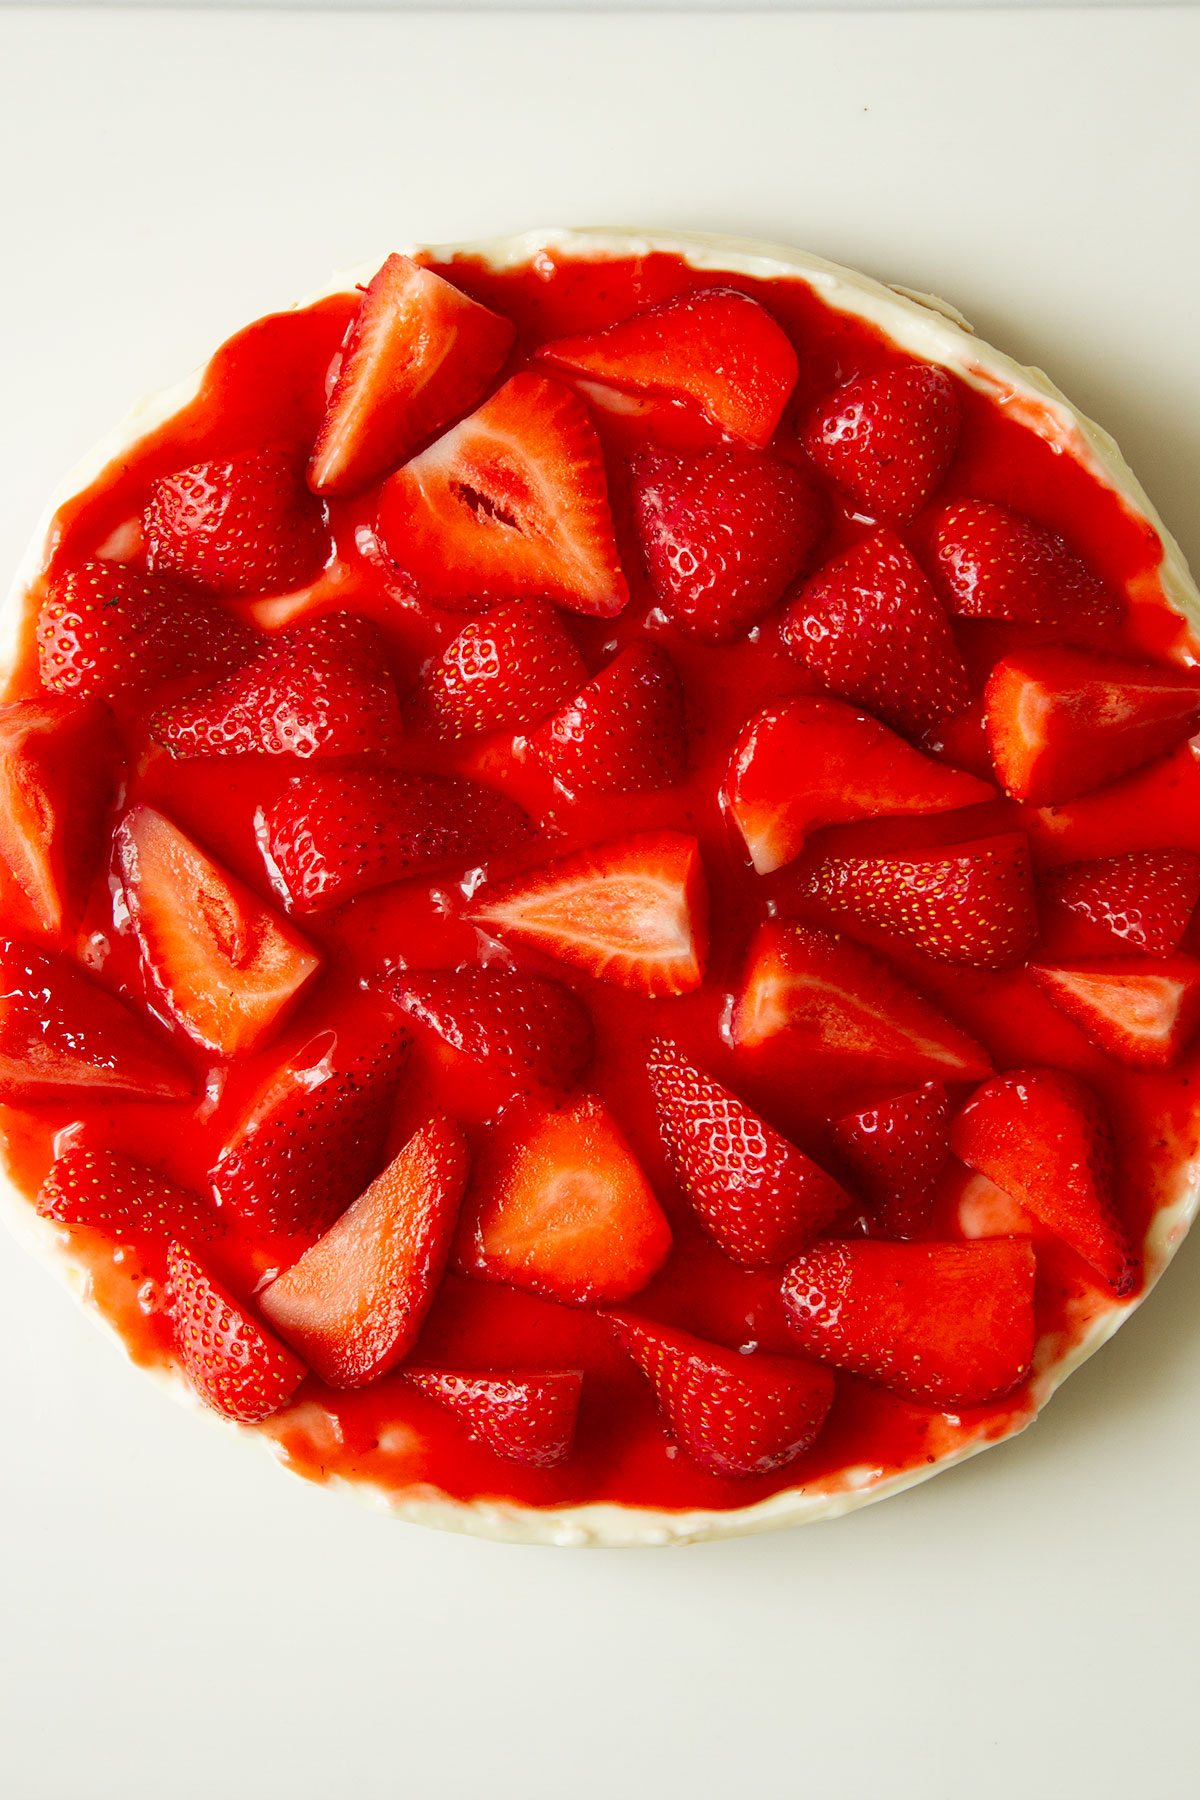 No Bake Strawberry Cheesecake in a white dish topped with fresh strawberries ready for serving.